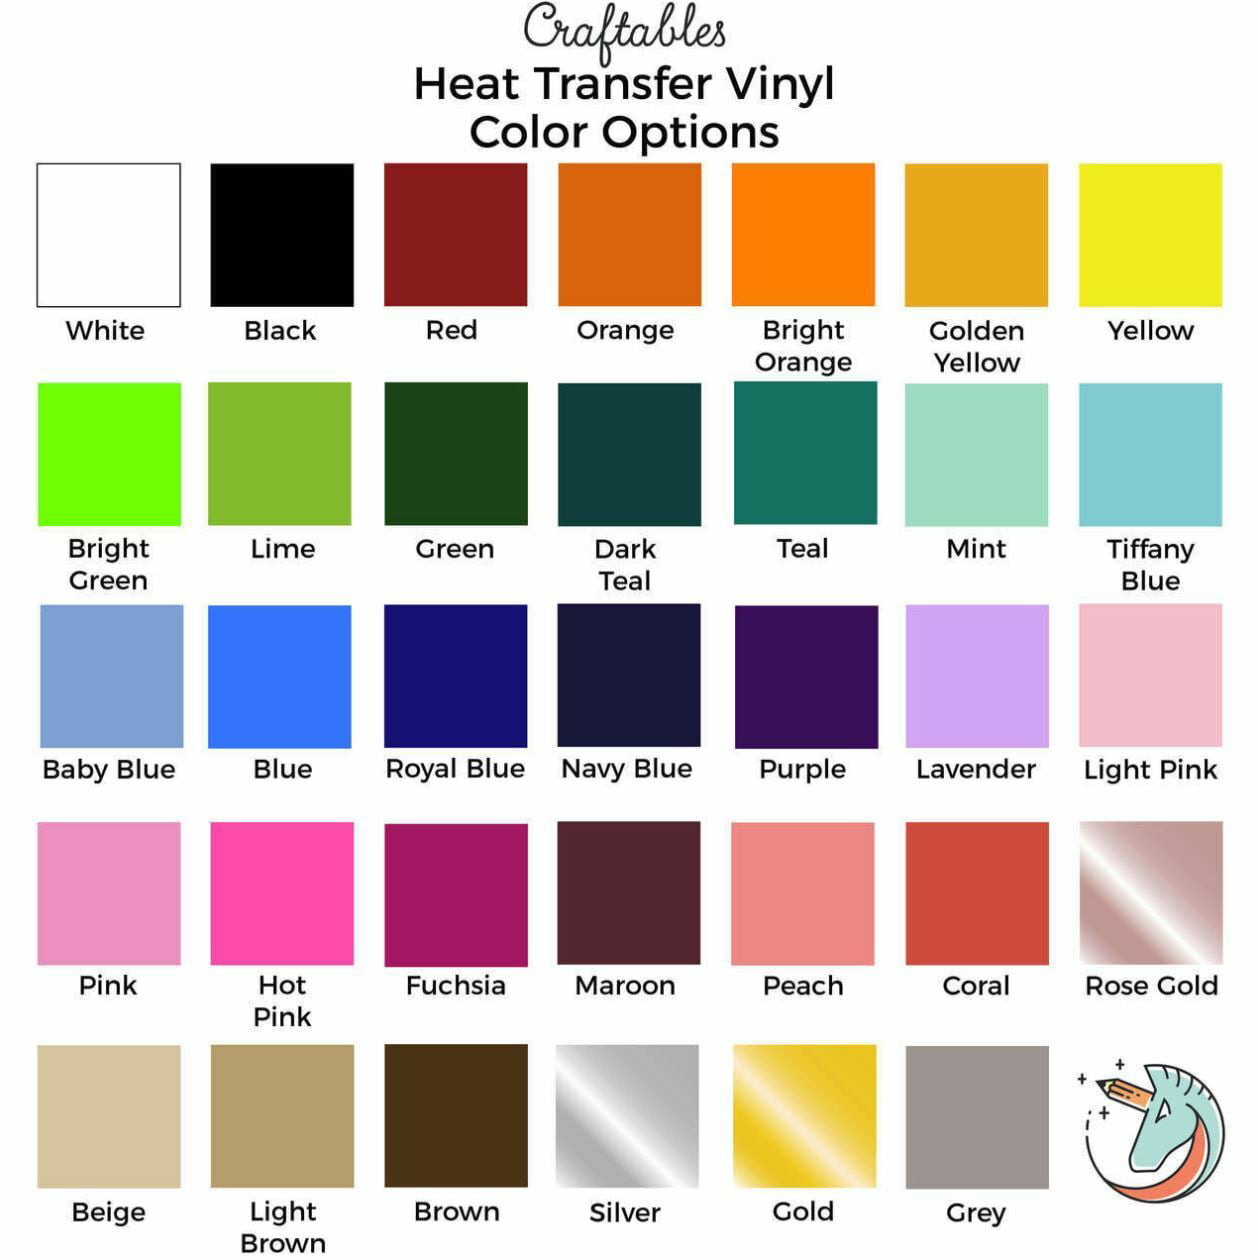 Craftables Dark Teal Heat Transfer Vinyl Roll HTV 6 ft. - Easy to Weed  Tshirt Iron on Vinyl for Silhouette Cameo, Cricut, Heat Press, All Craft  Cutters 